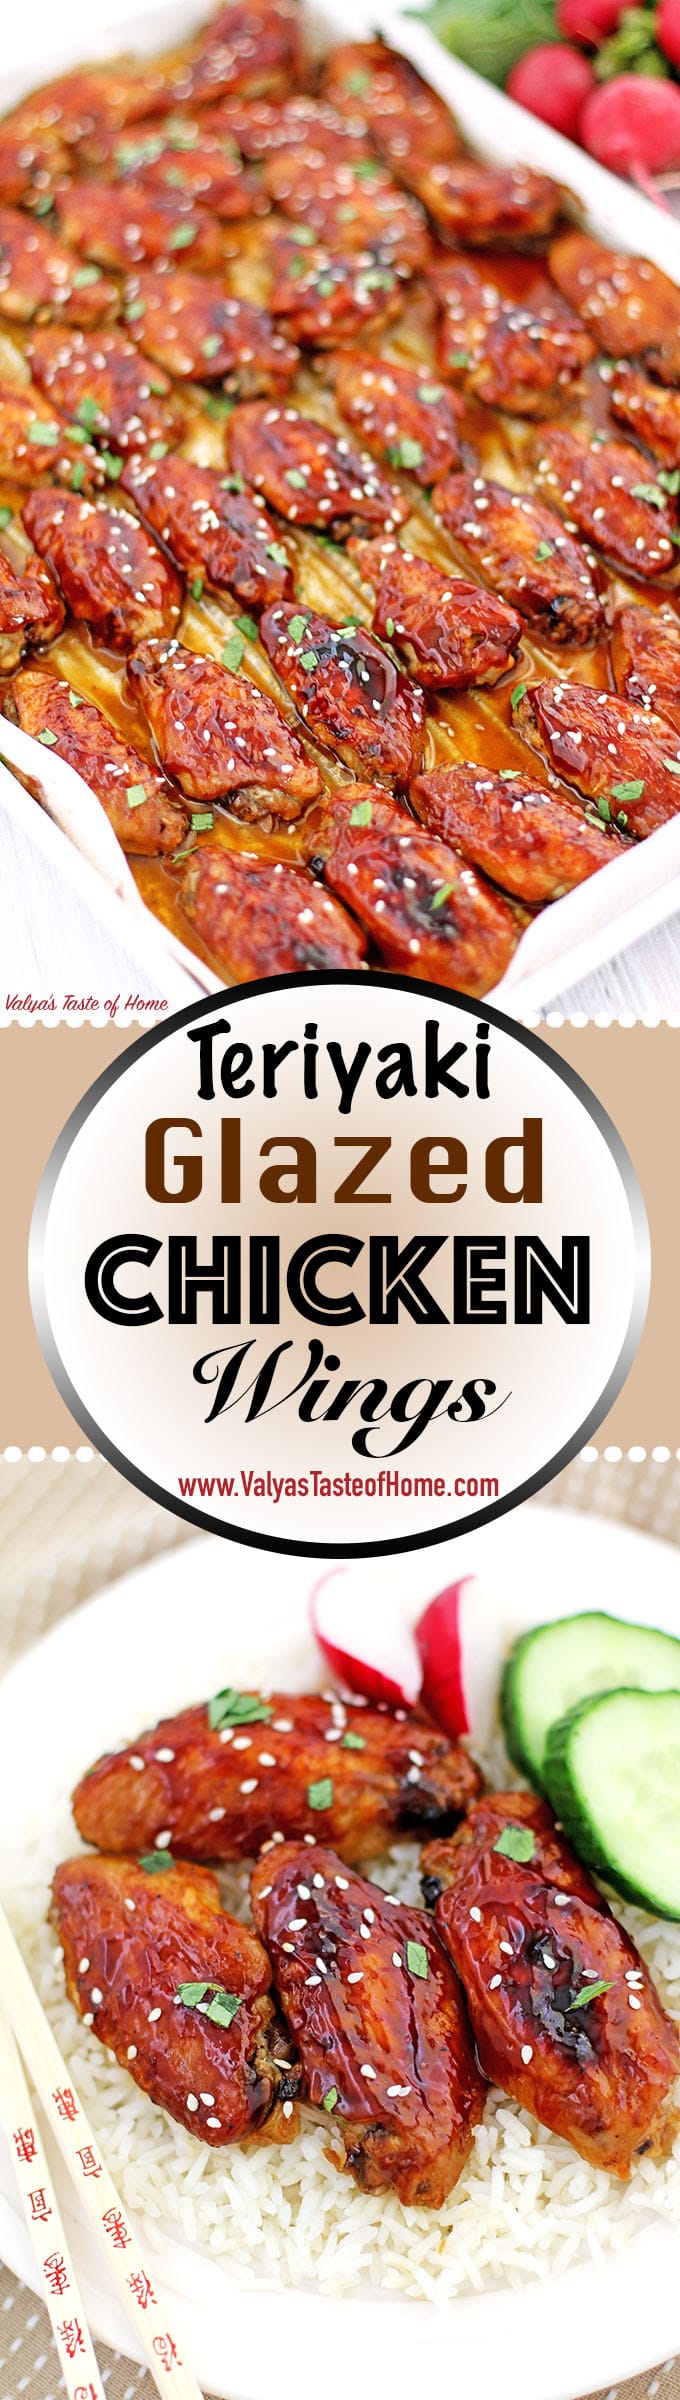 baked chicken, comfort food, delicious, homemade, homemade teriyaki glaze, oven baked chicken, teriyaki chicken wings, Teriyaki Glazed Chicken Wings